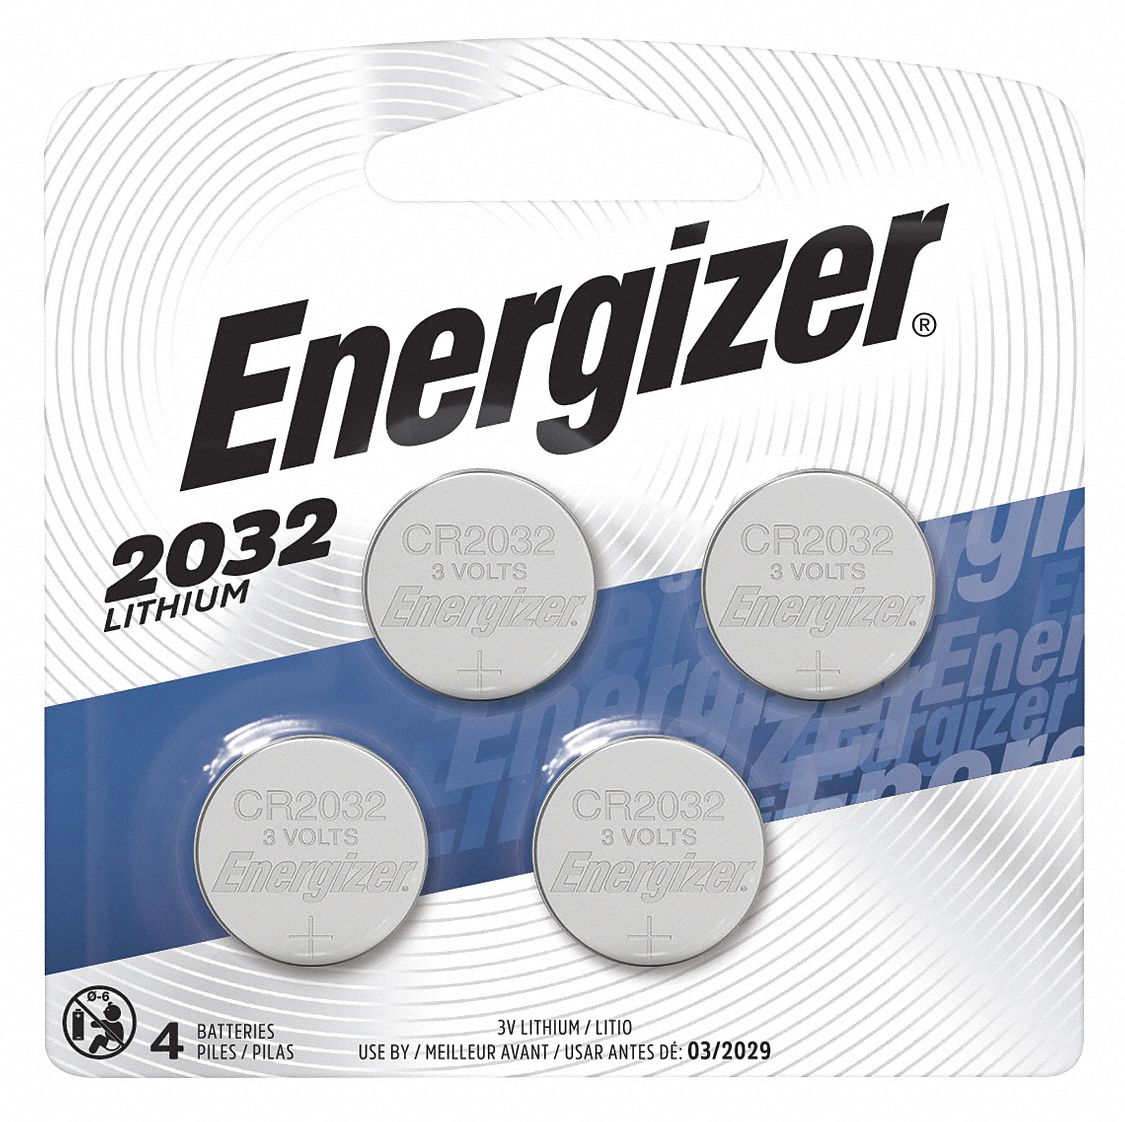 String string calorie sarcoom ENERGIZER, 2032 Battery Size, Lithium, Coin Cell Battery - 45EJ83|2032BP-4  - Grainger